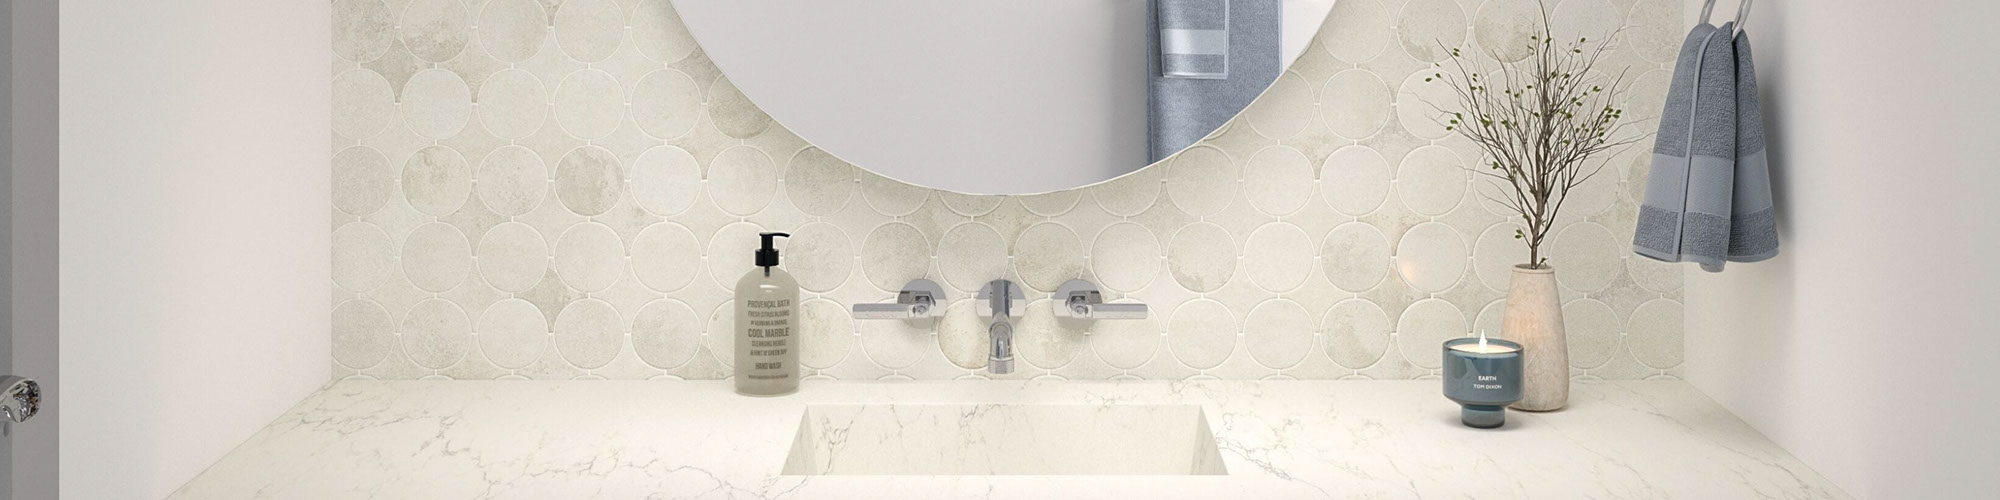 Bathroom vanity with white & gray canvas dot tile backsplash and quartz countertop, both look like marble, wall-mounted faucet, and round mirror.